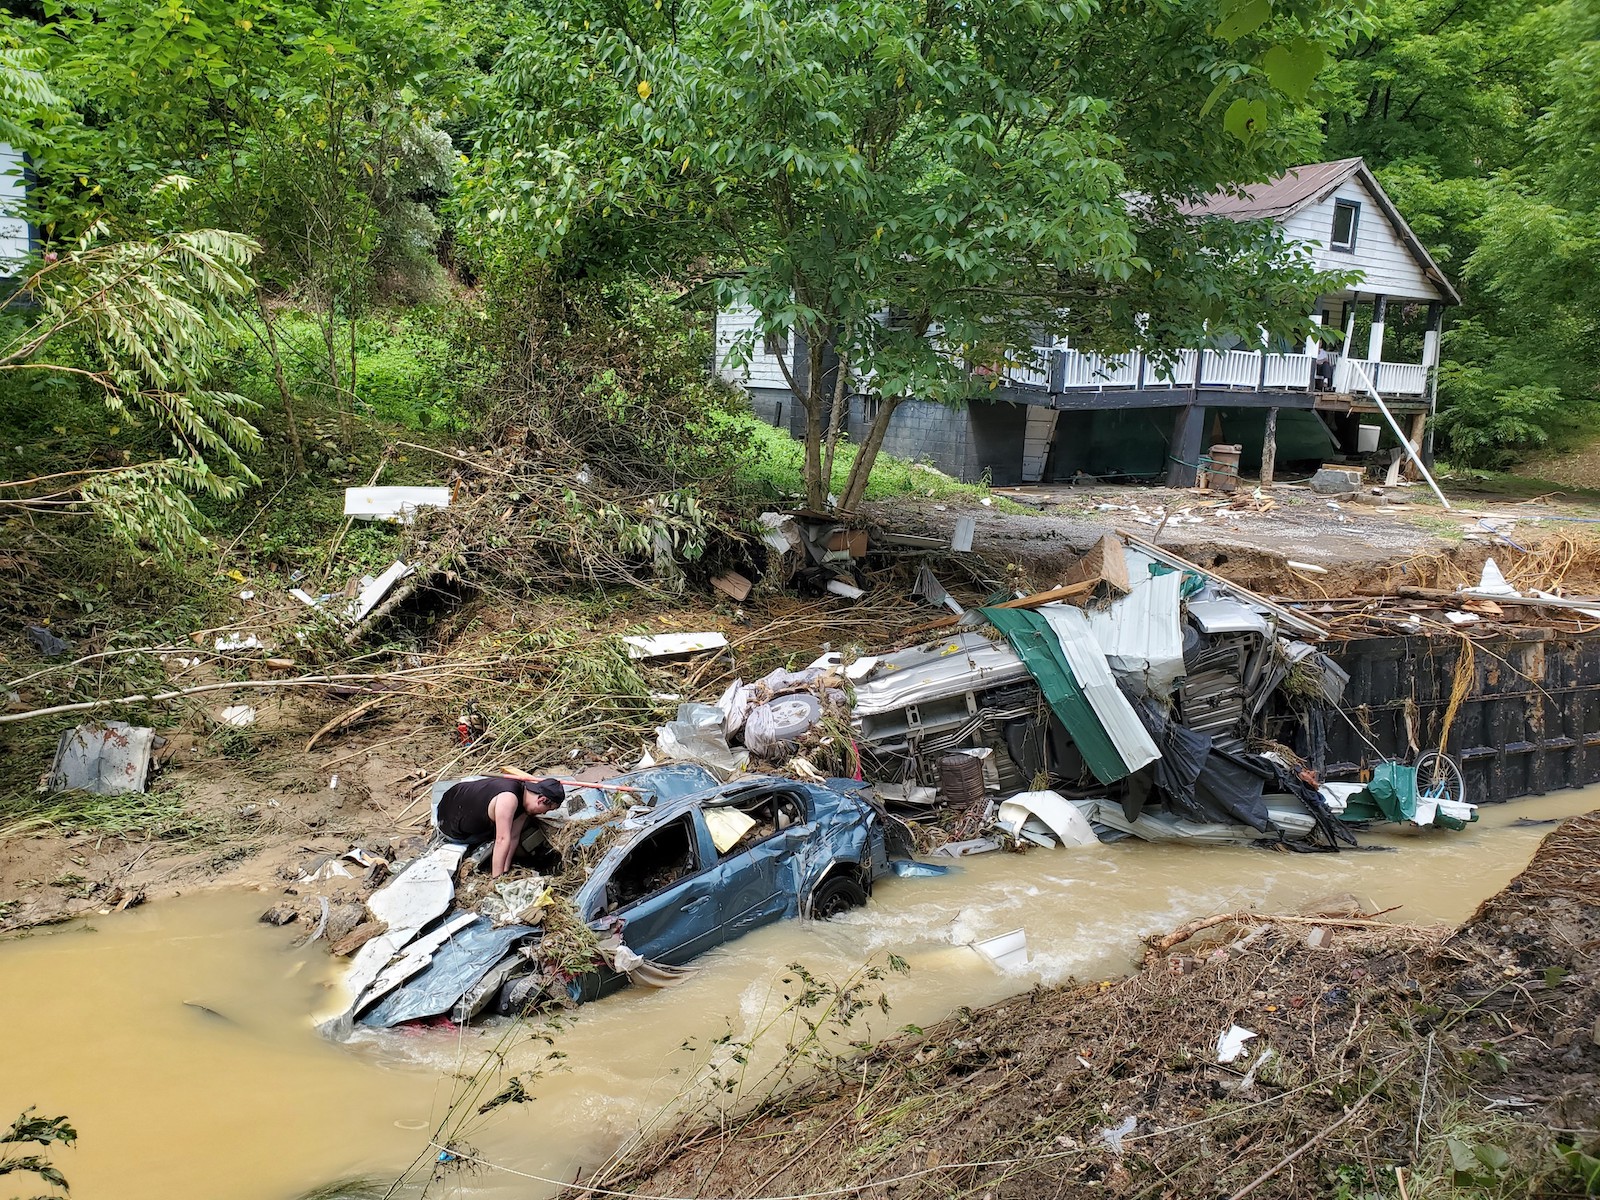 A house and vehicles destroyed by heavy rain-caused flooding in Central Appalachia in Kentucky, the United States